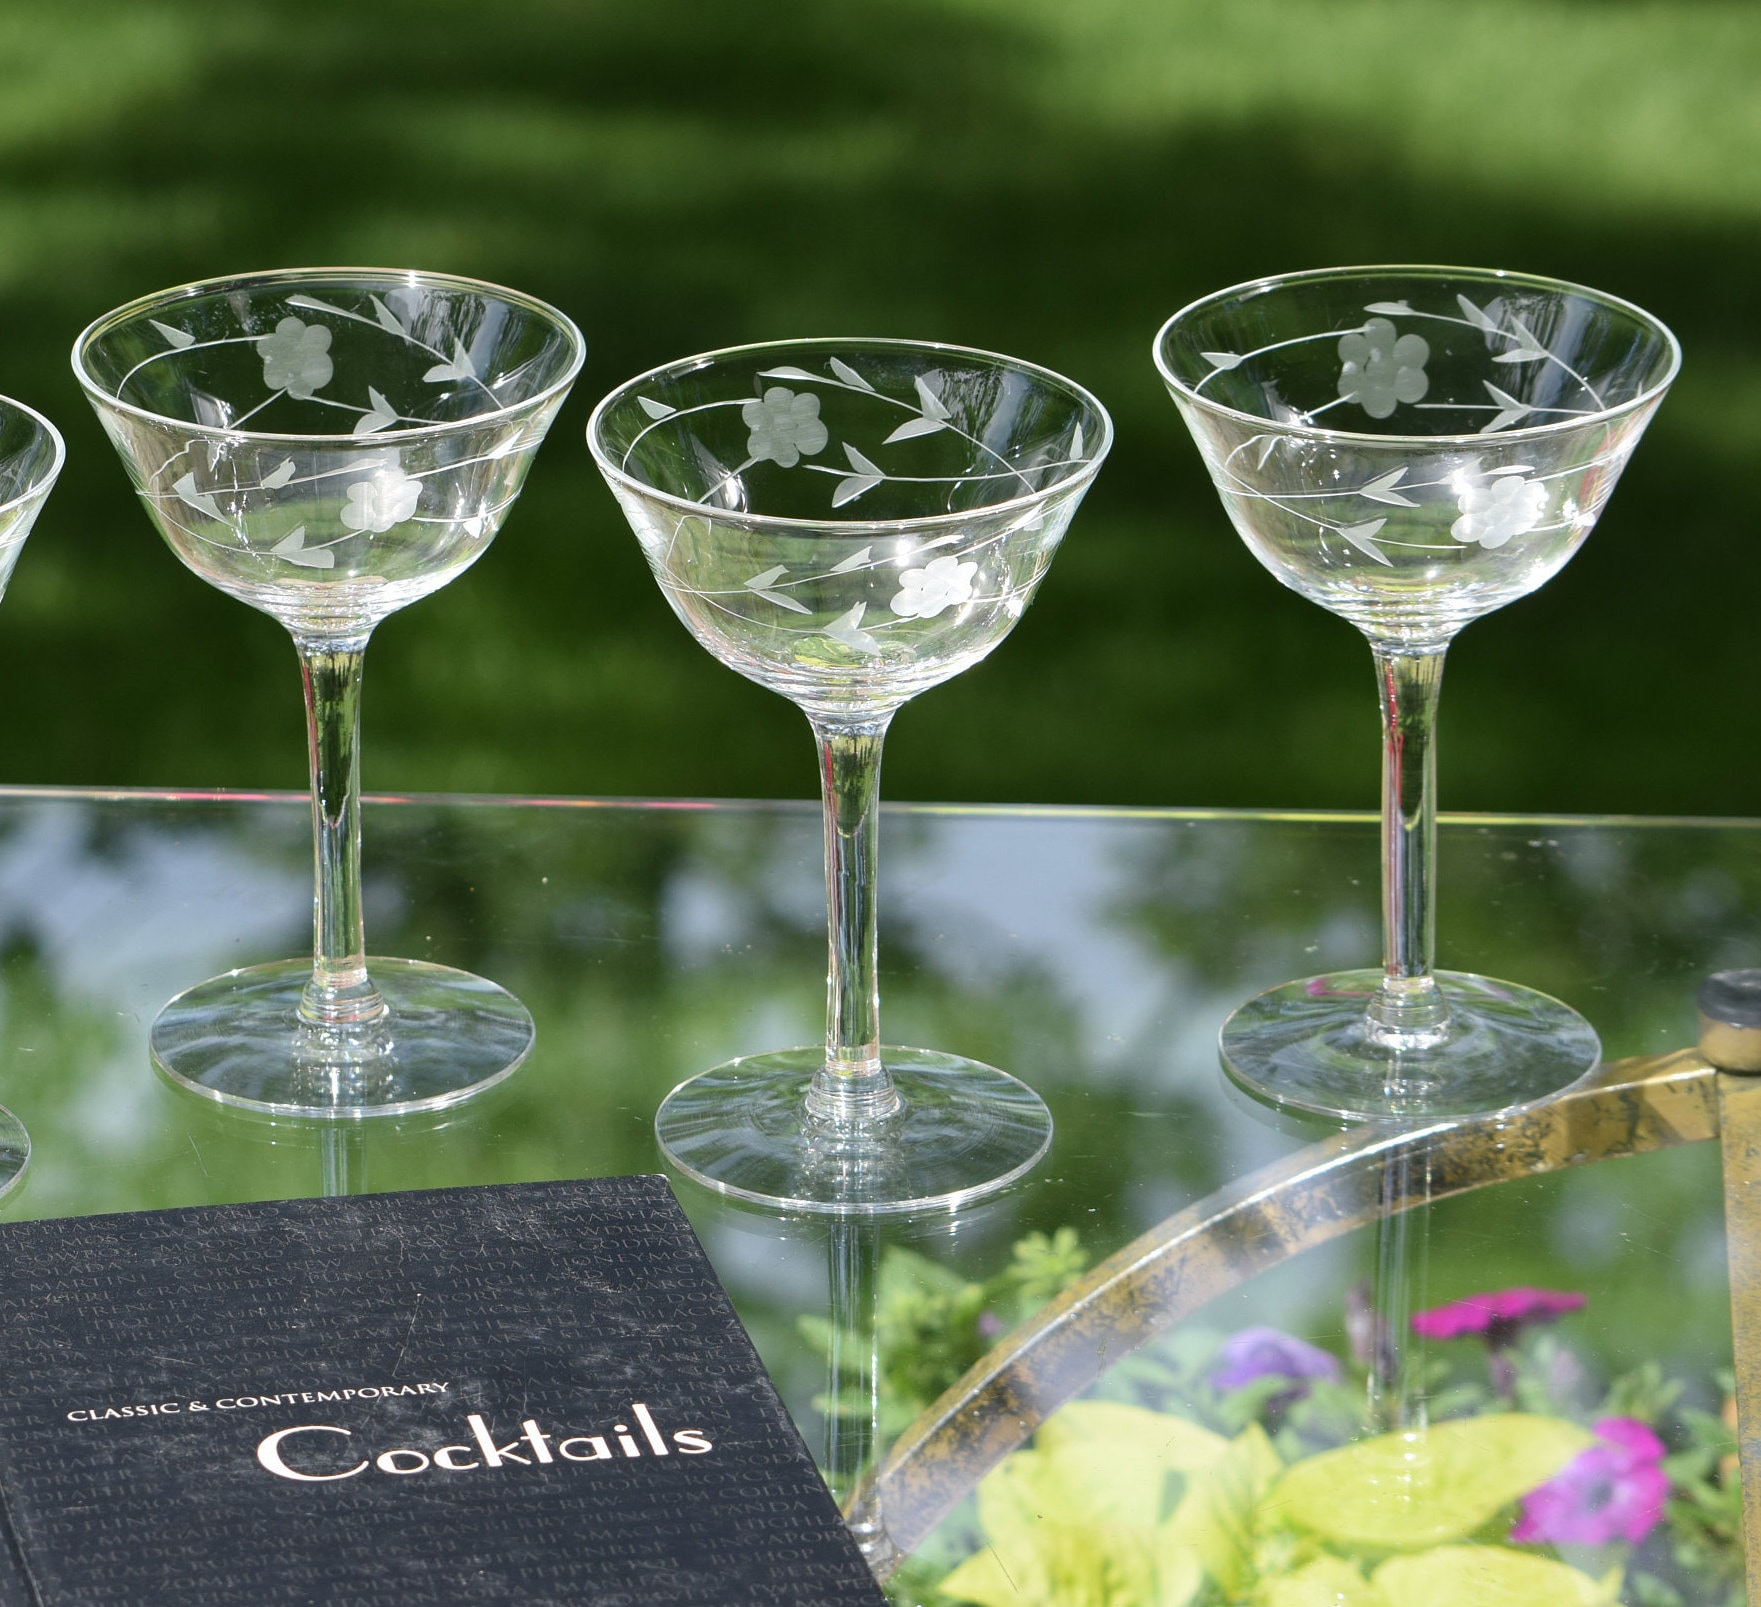 Modern Cocktail Glasses: Coupe Glasses, Old-Fashioned Glasses